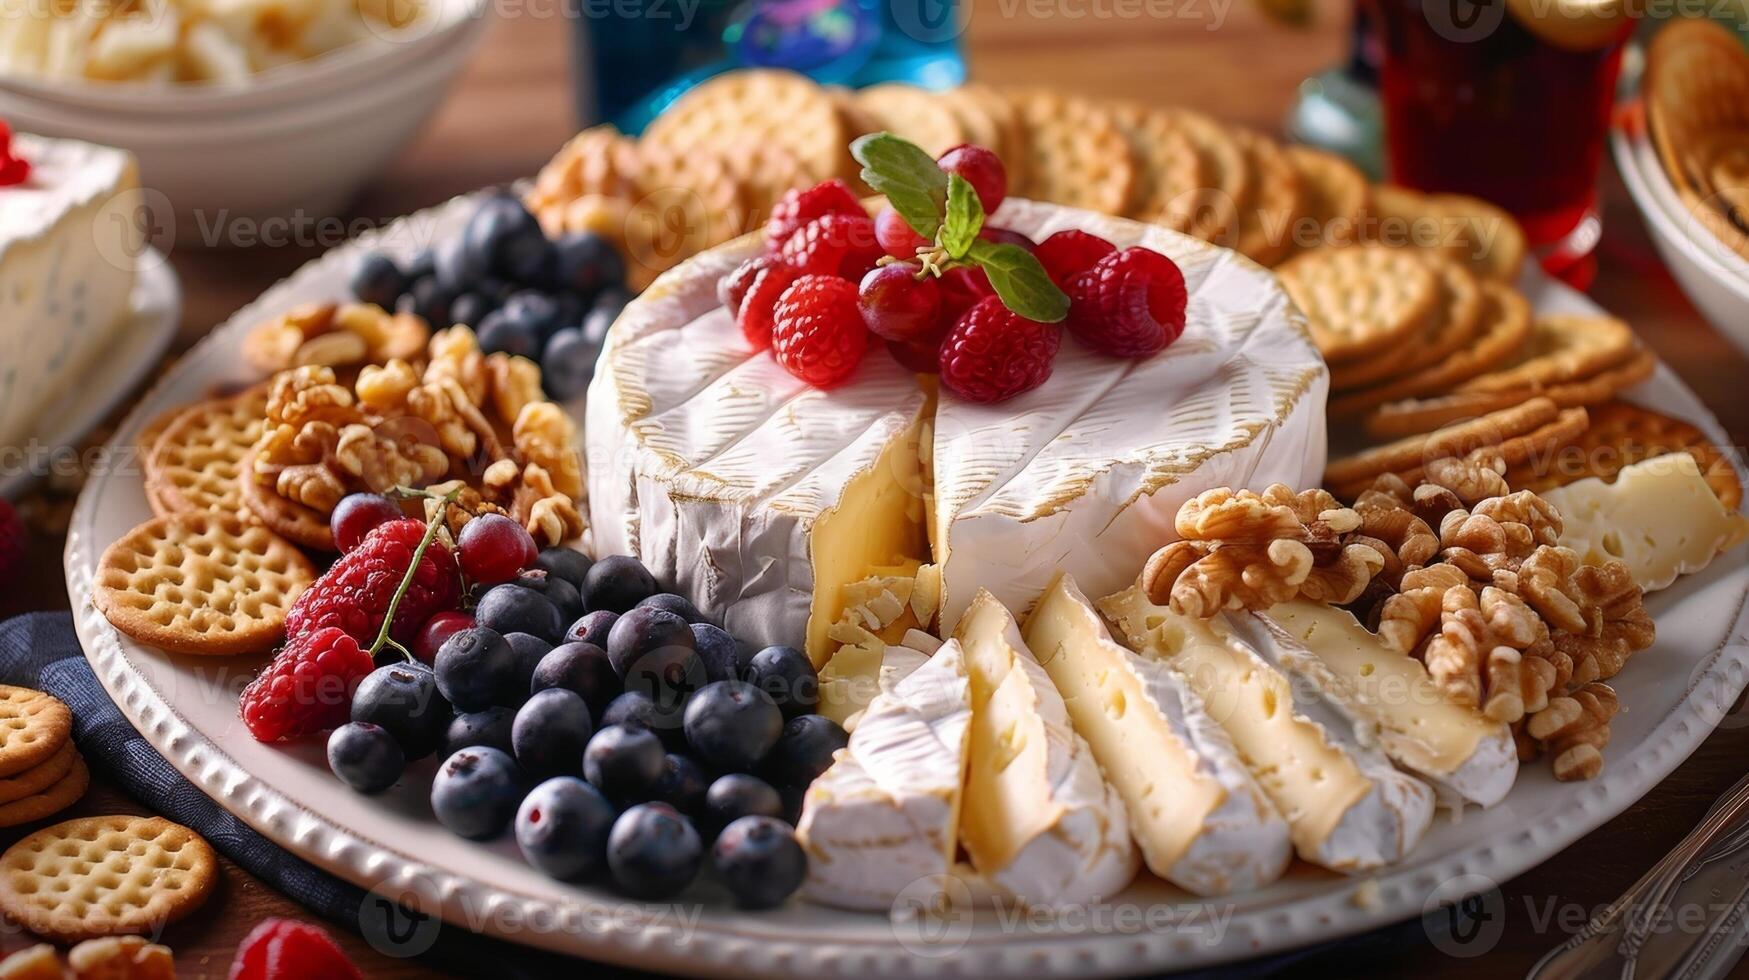 A delectable spread of artisanal cheeses such as tangy Roquefort creamy Camembert and nutty aged cheddar beautifully arranged with a mix of juicy berries crispy crackers and honeyroaste photo